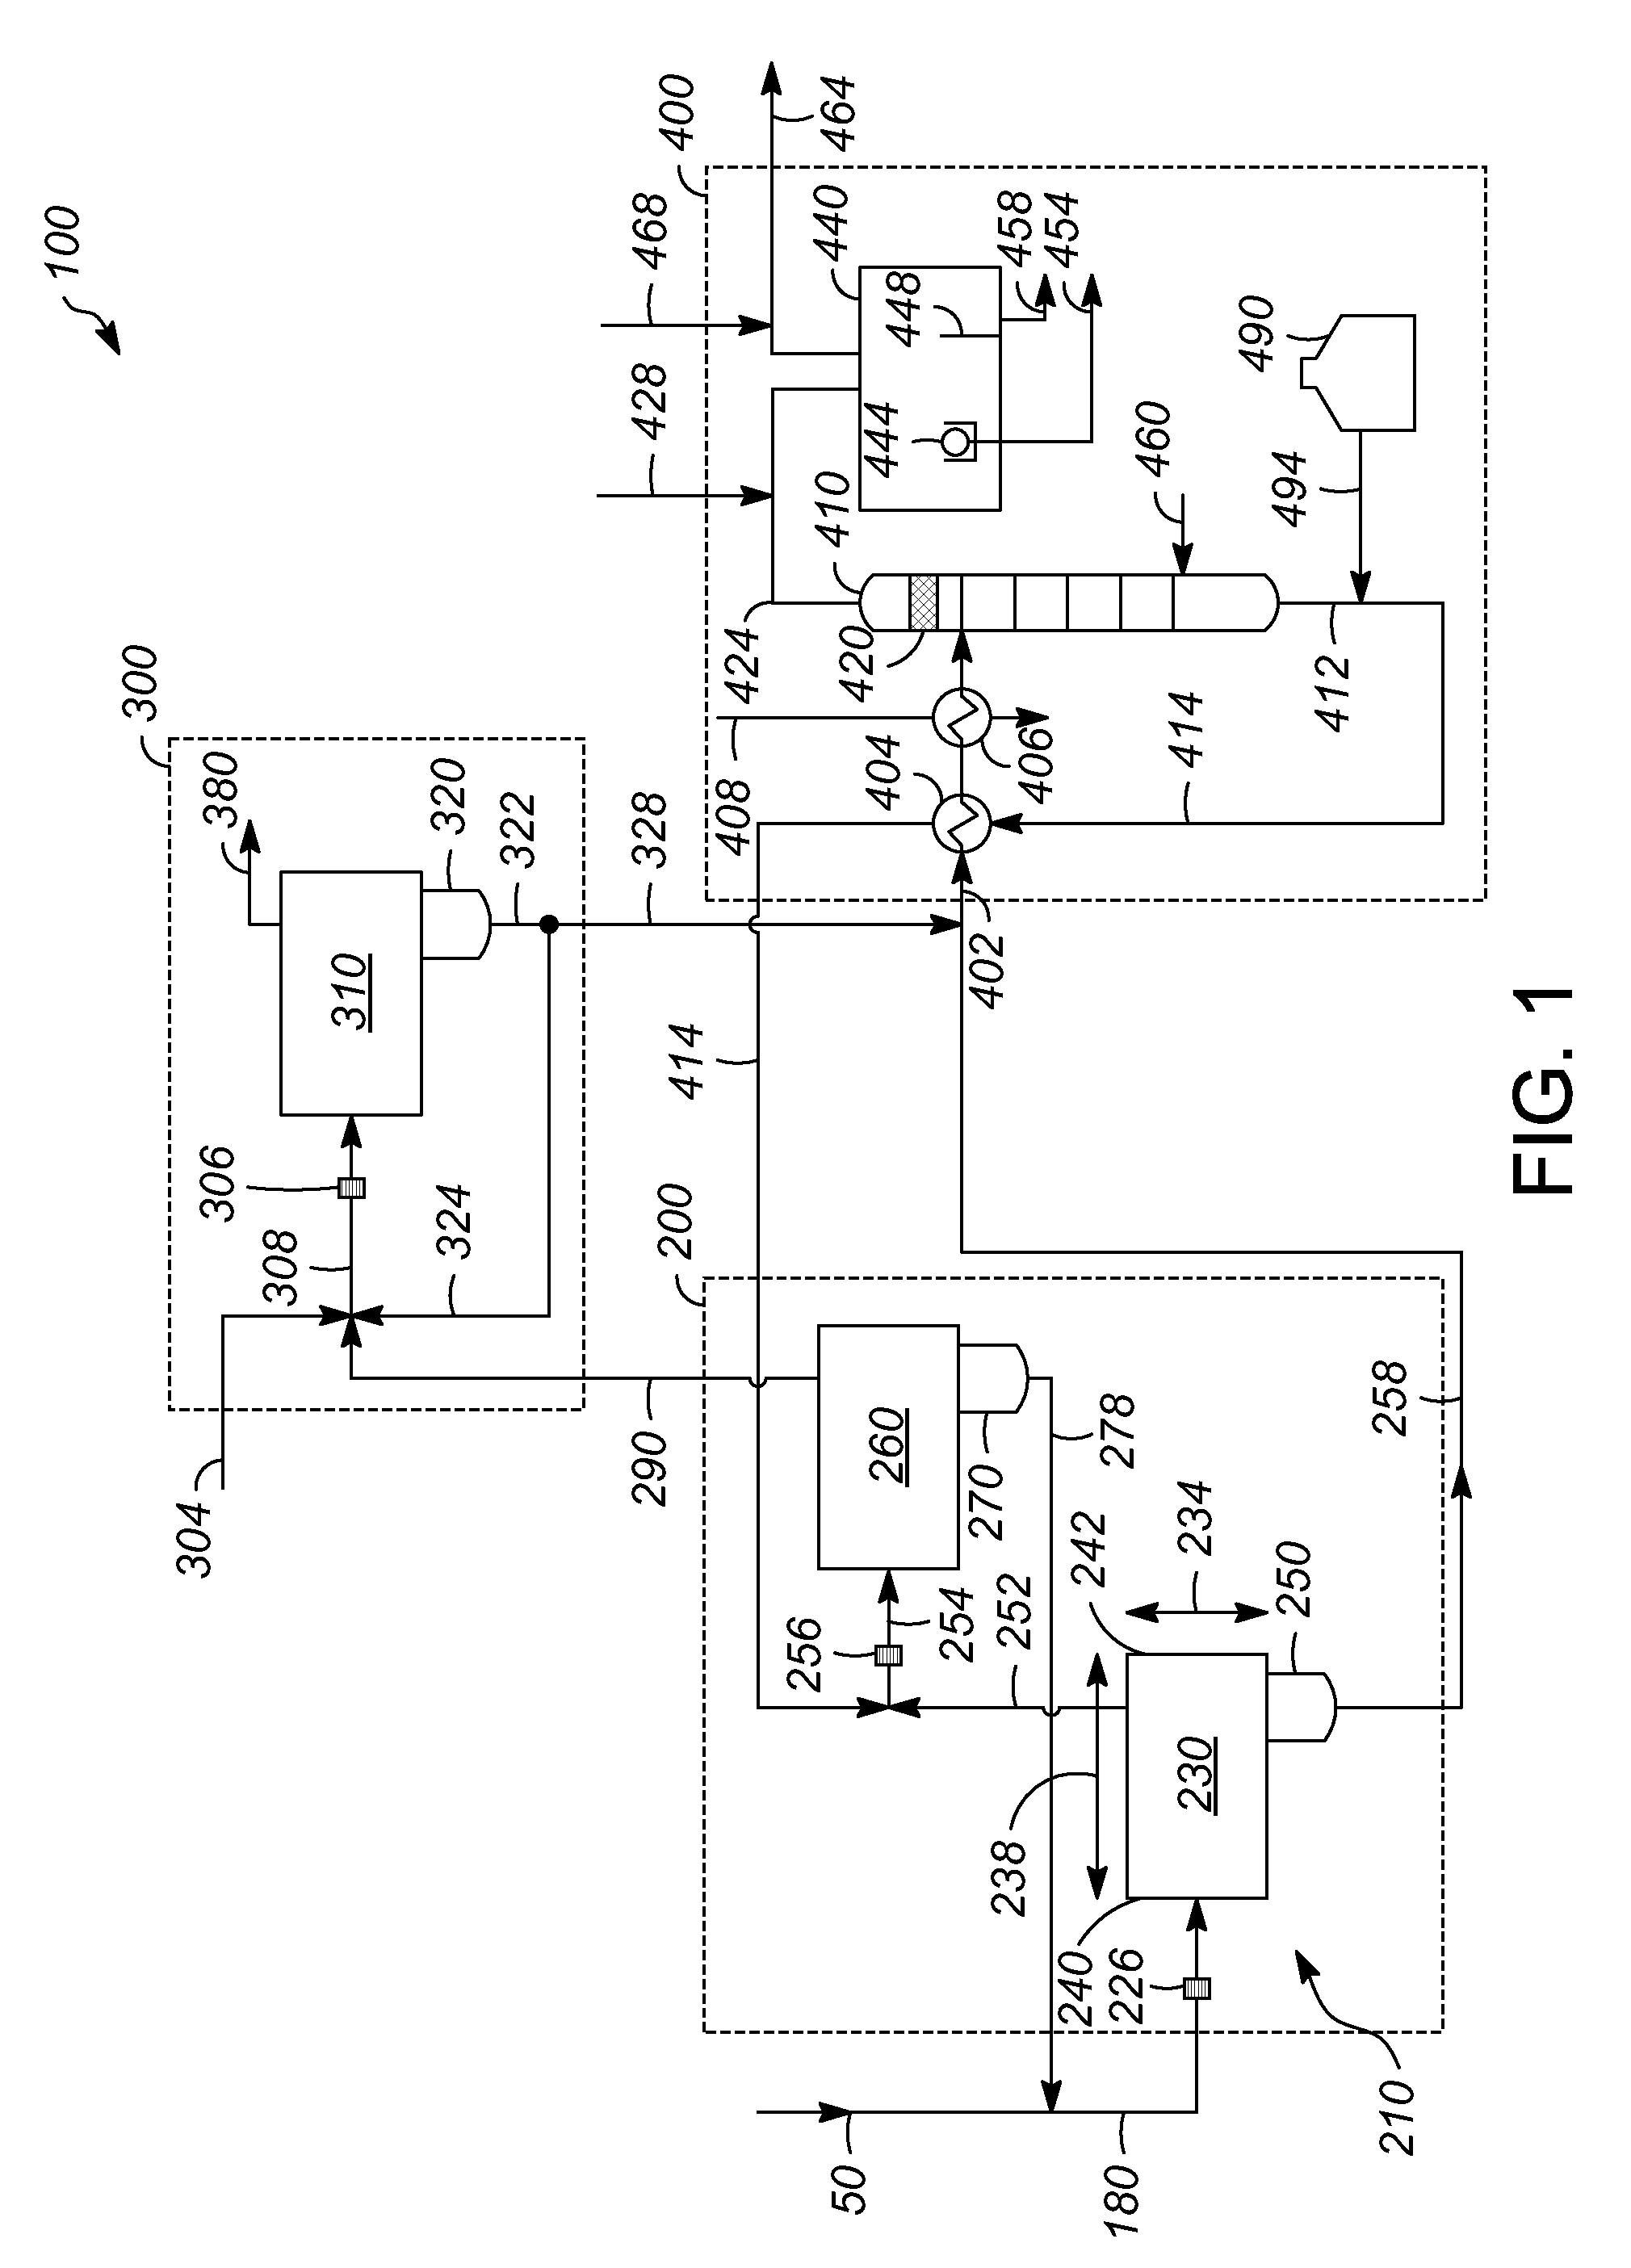 Apparatus and process for treating a hydrocarbon stream